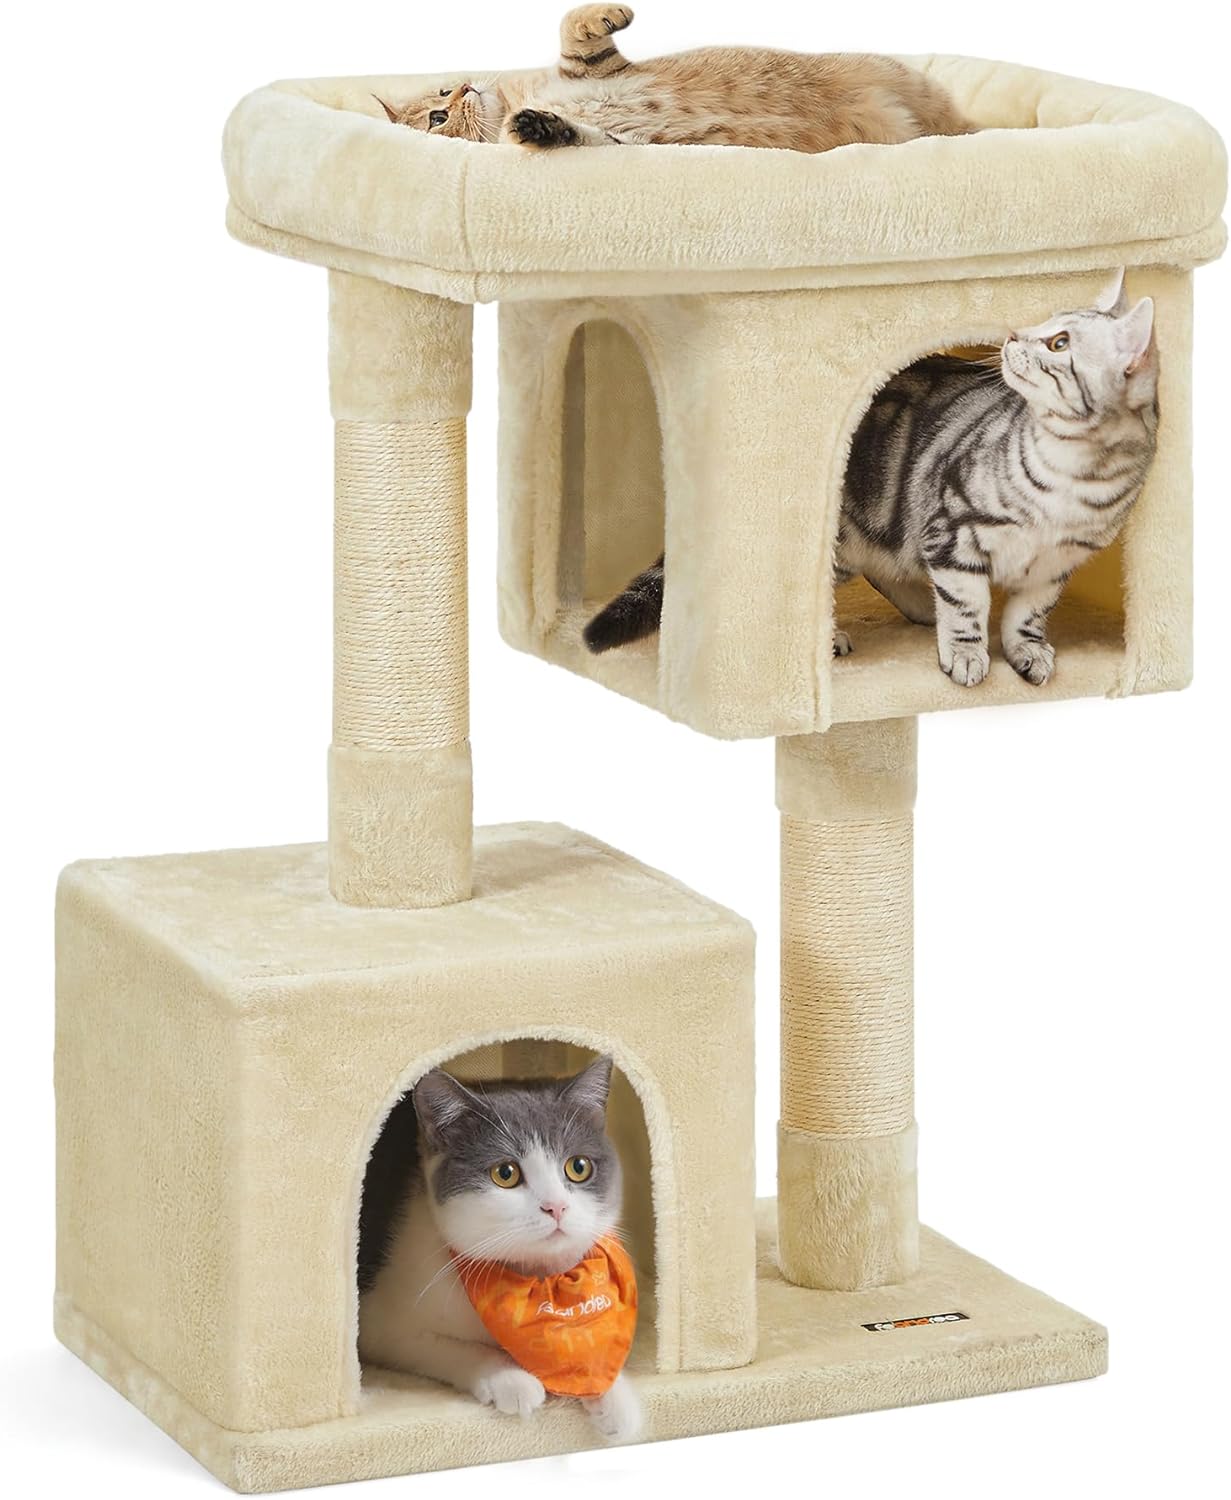 Cat Tree, 26.4-Inch Cat Tower, S, Cat Condo for Kittens up to 7 Lb, Large Cat Perch, 2 Cat Caves, Scratching Post, Beige UPCT611M01